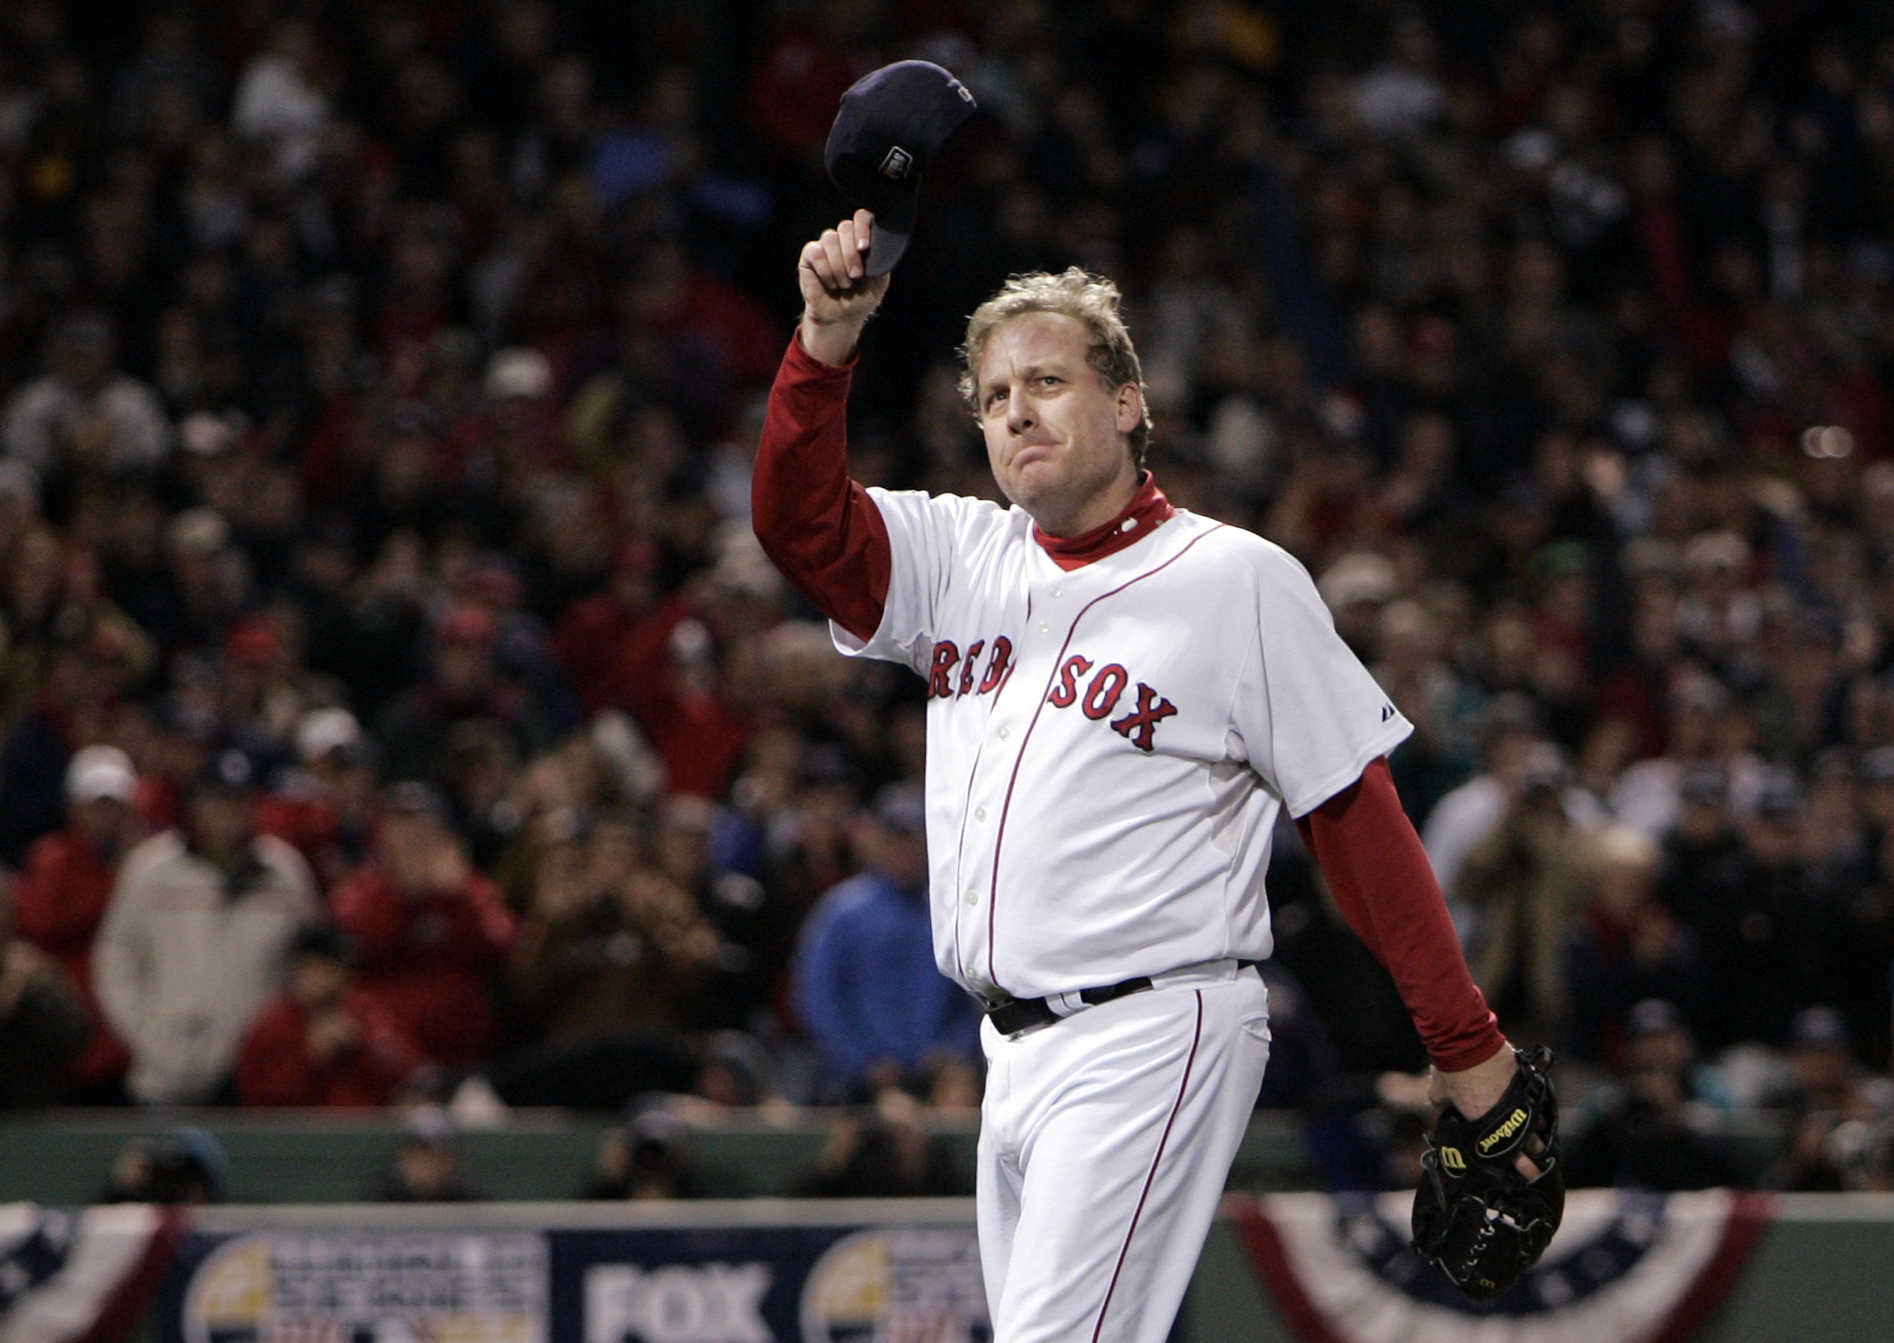 Curt Schilling denied Hall of Fame induction by Contemporary Era committee  